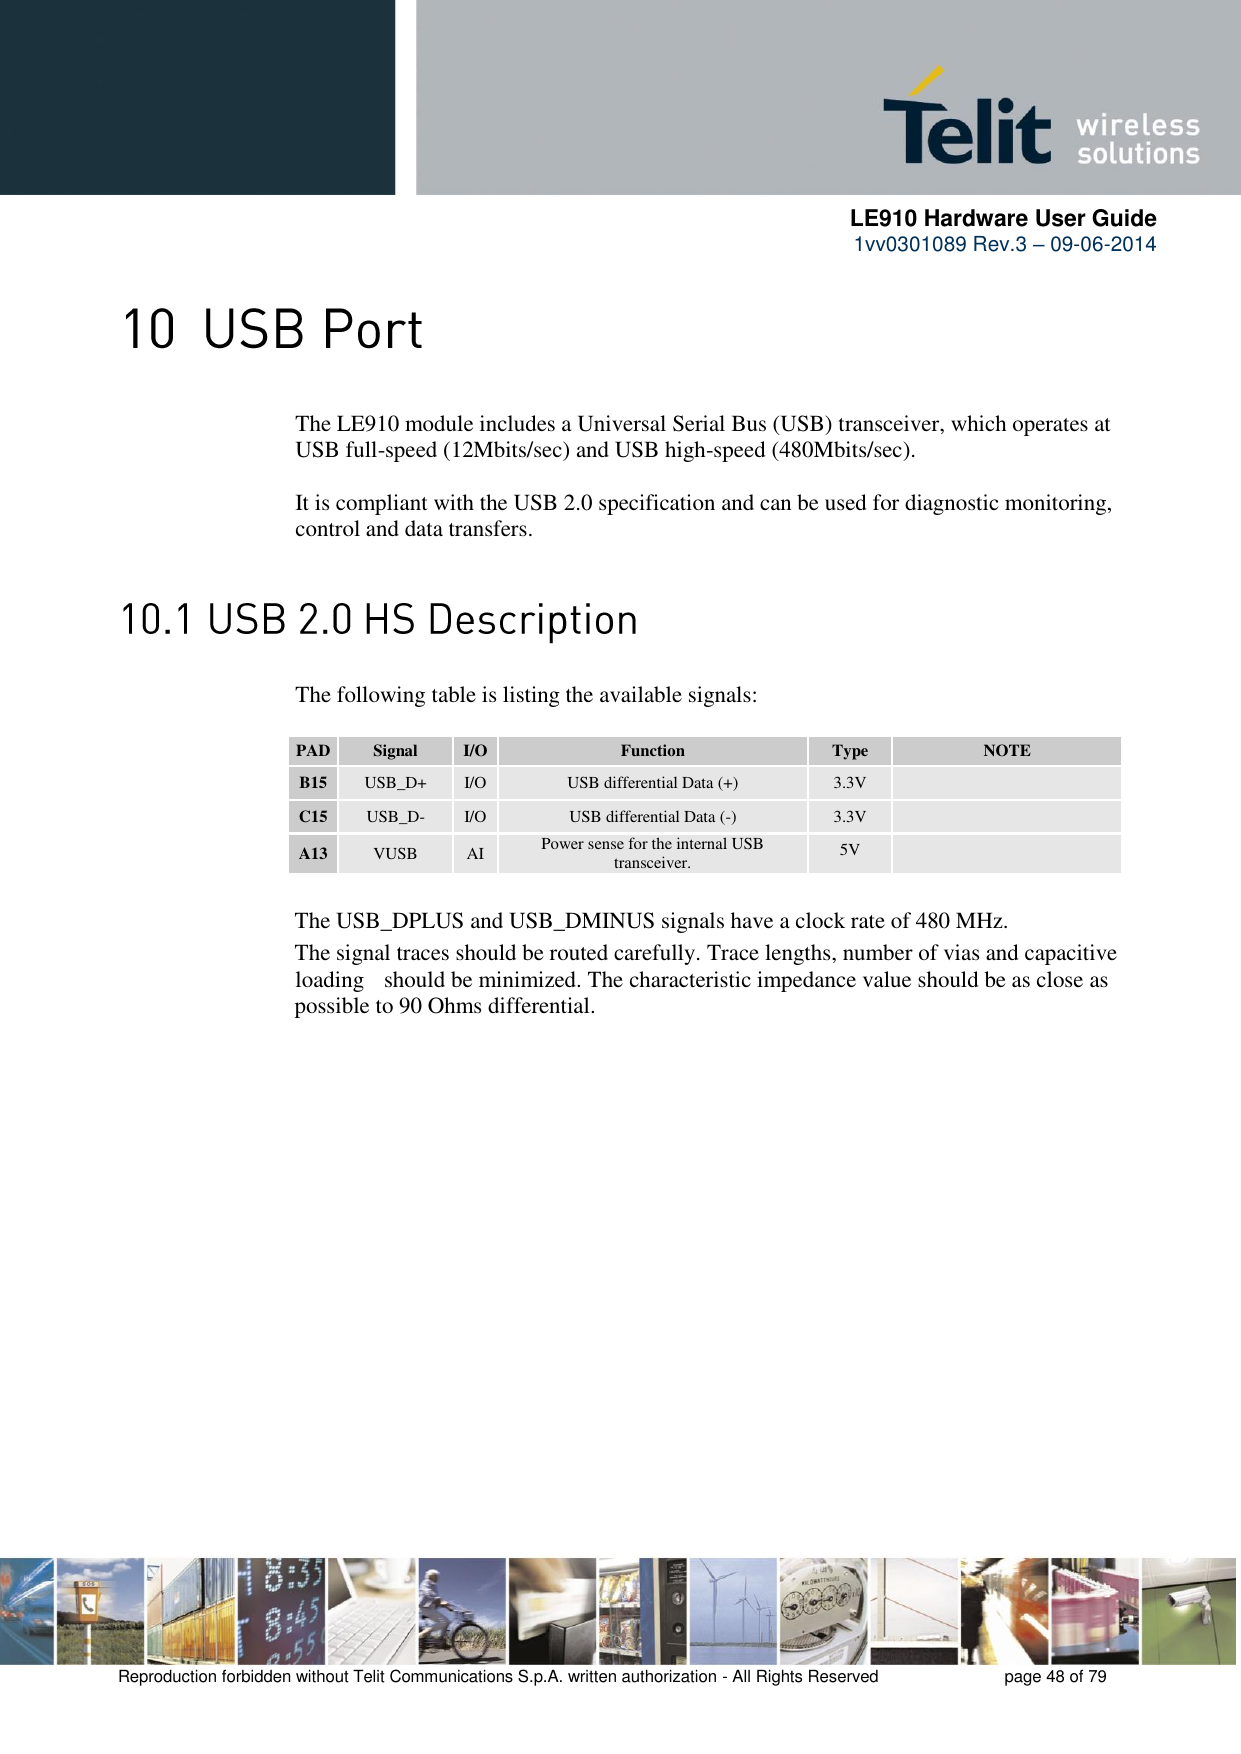      LE910 Hardware User Guide 1vv0301089 Rev.3 – 09-06-2014    Reproduction forbidden without Telit Communications S.p.A. written authorization - All Rights Reserved    page 48 of 79   The LE910 module includes a Universal Serial Bus (USB) transceiver, which operates at USB full-speed (12Mbits/sec) and USB high-speed (480Mbits/sec).   It is compliant with the USB 2.0 specification and can be used for diagnostic monitoring, control and data transfers.          The following table is listing the available signals:  PAD Signal I/O Function Type NOTE B15 USB_D+ I/O USB differential Data (+) 3.3V  C15 USB_D- I/O USB differential Data (-) 3.3V  A13 VUSB AI Power sense for the internal USB transceiver. 5V   The USB_DPLUS and USB_DMINUS signals have a clock rate of 480 MHz.  The signal traces should be routed carefully. Trace lengths, number of vias and capacitive  loading   should be minimized. The characteristic impedance value should be as close as possible to 90 Ohms differential.                    